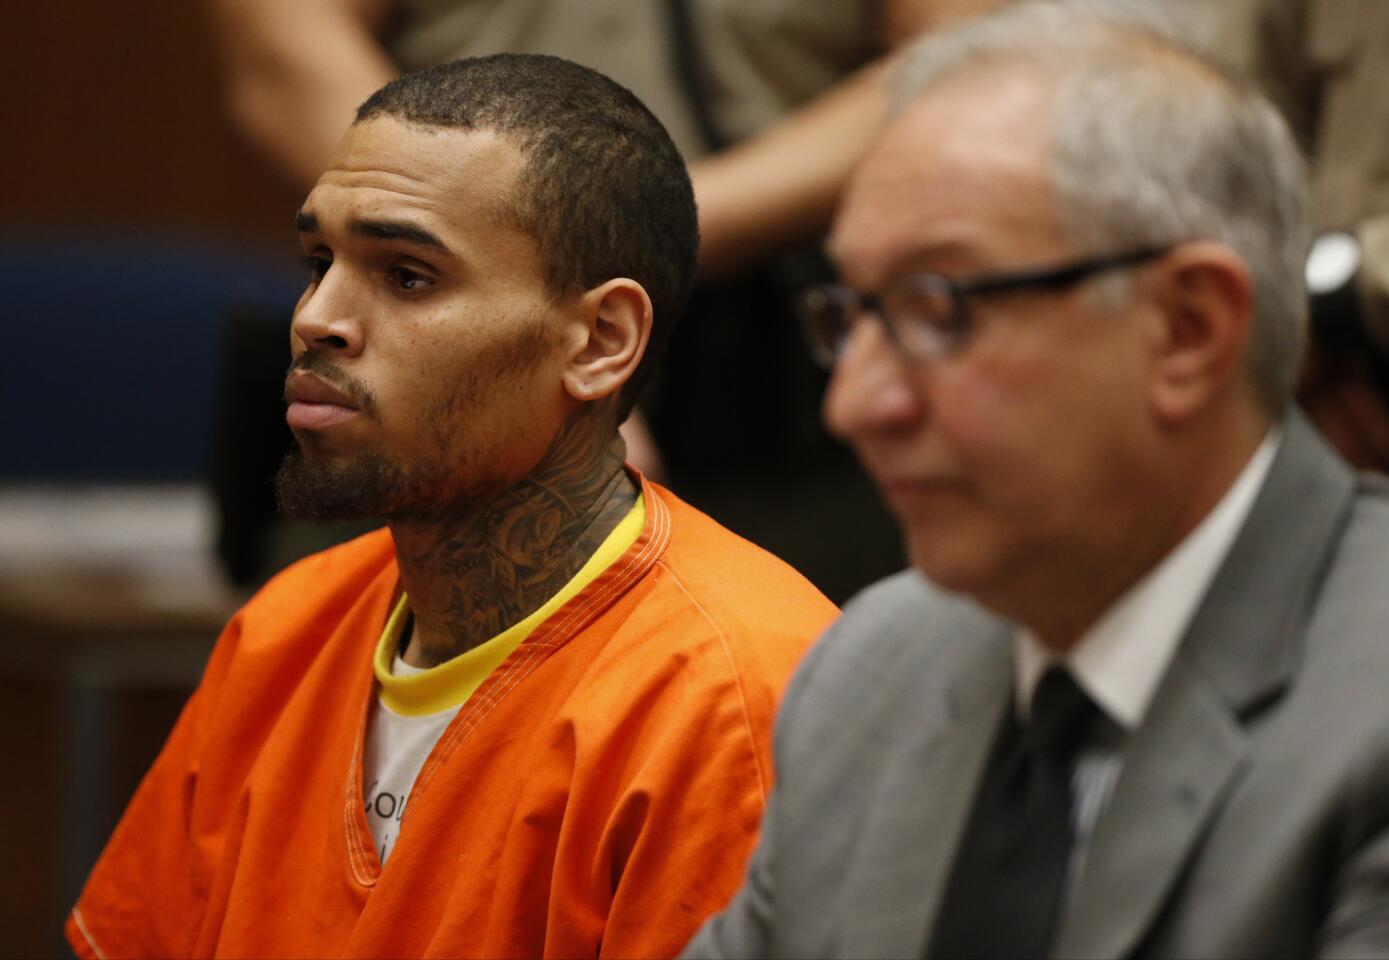 Forced to wear an orange jumpsuit to court, Chris Brown was ordered by a Los Angeles County judge to stay in jail without bail until April 23, pending a hearing to determine whether he violated terms of his probation.